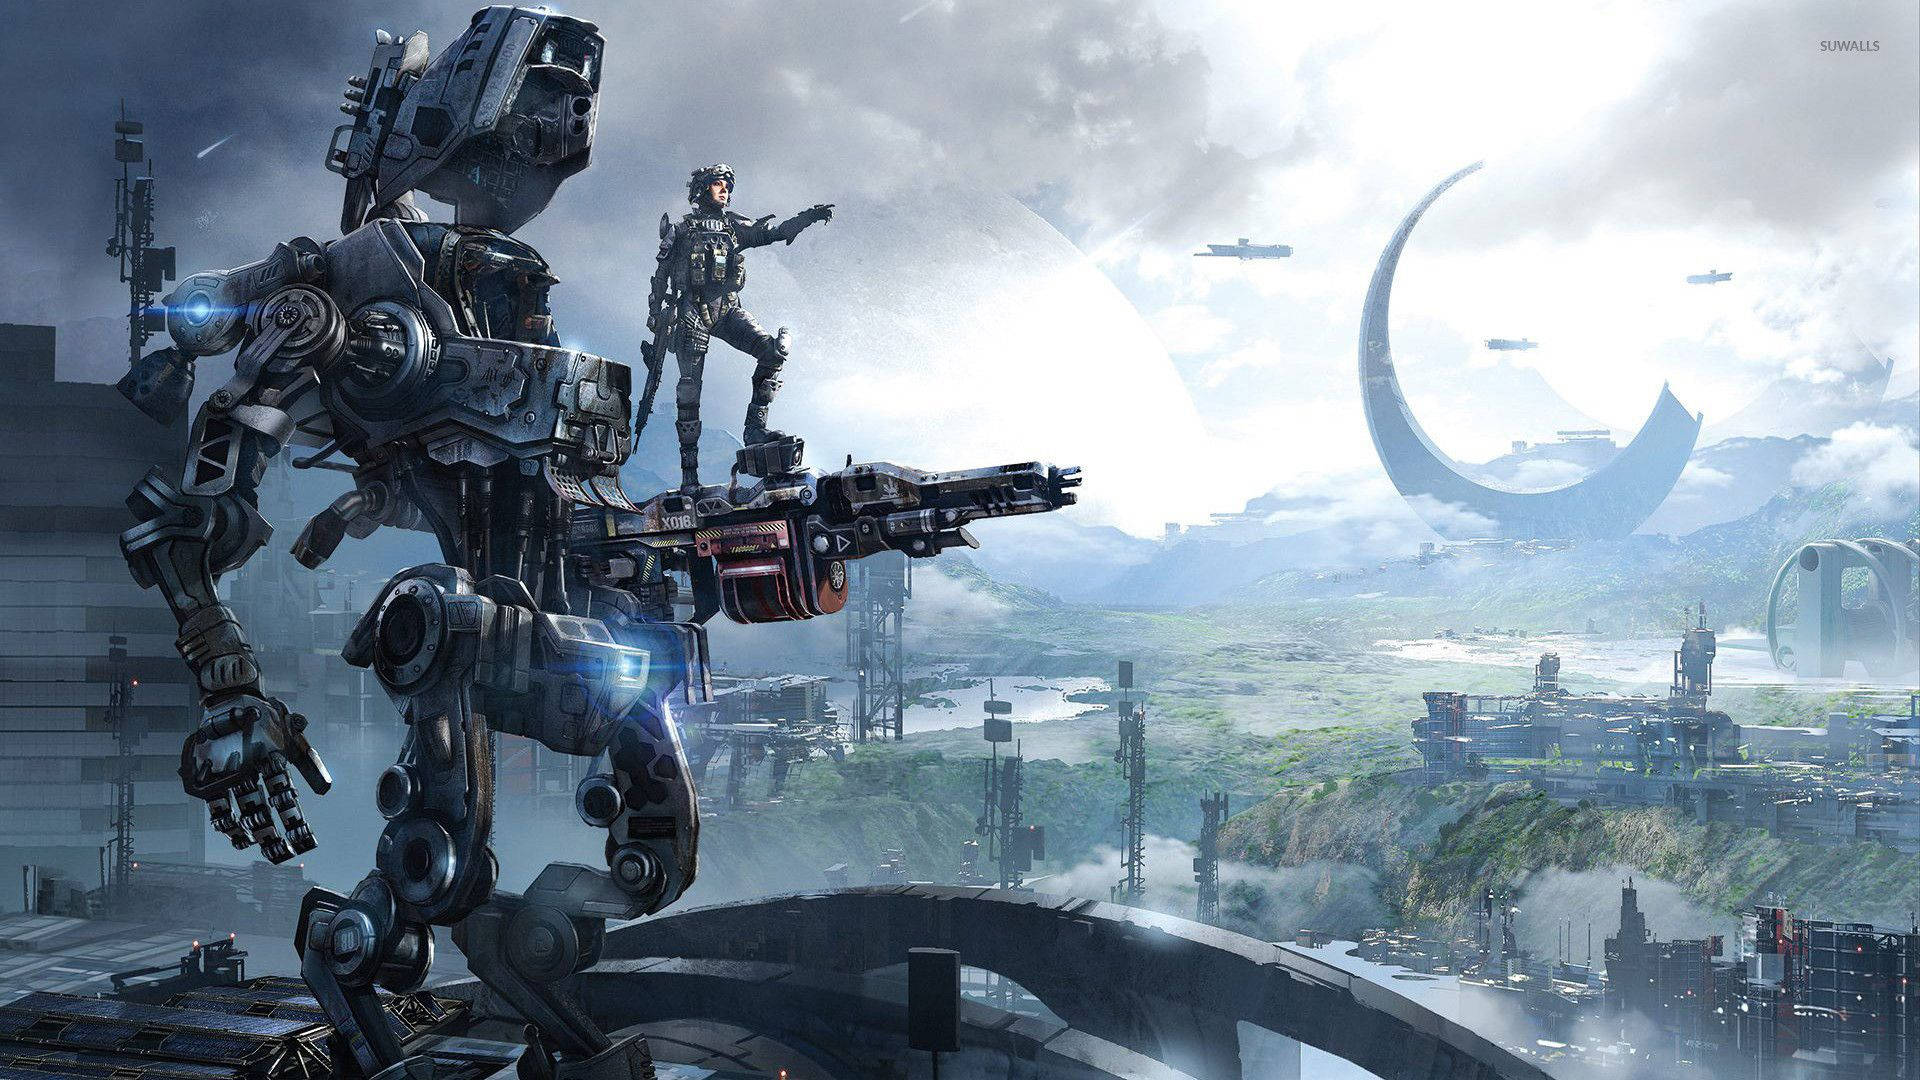 Explore the mysterious science fiction world of Titanfall 2 Wallpaper